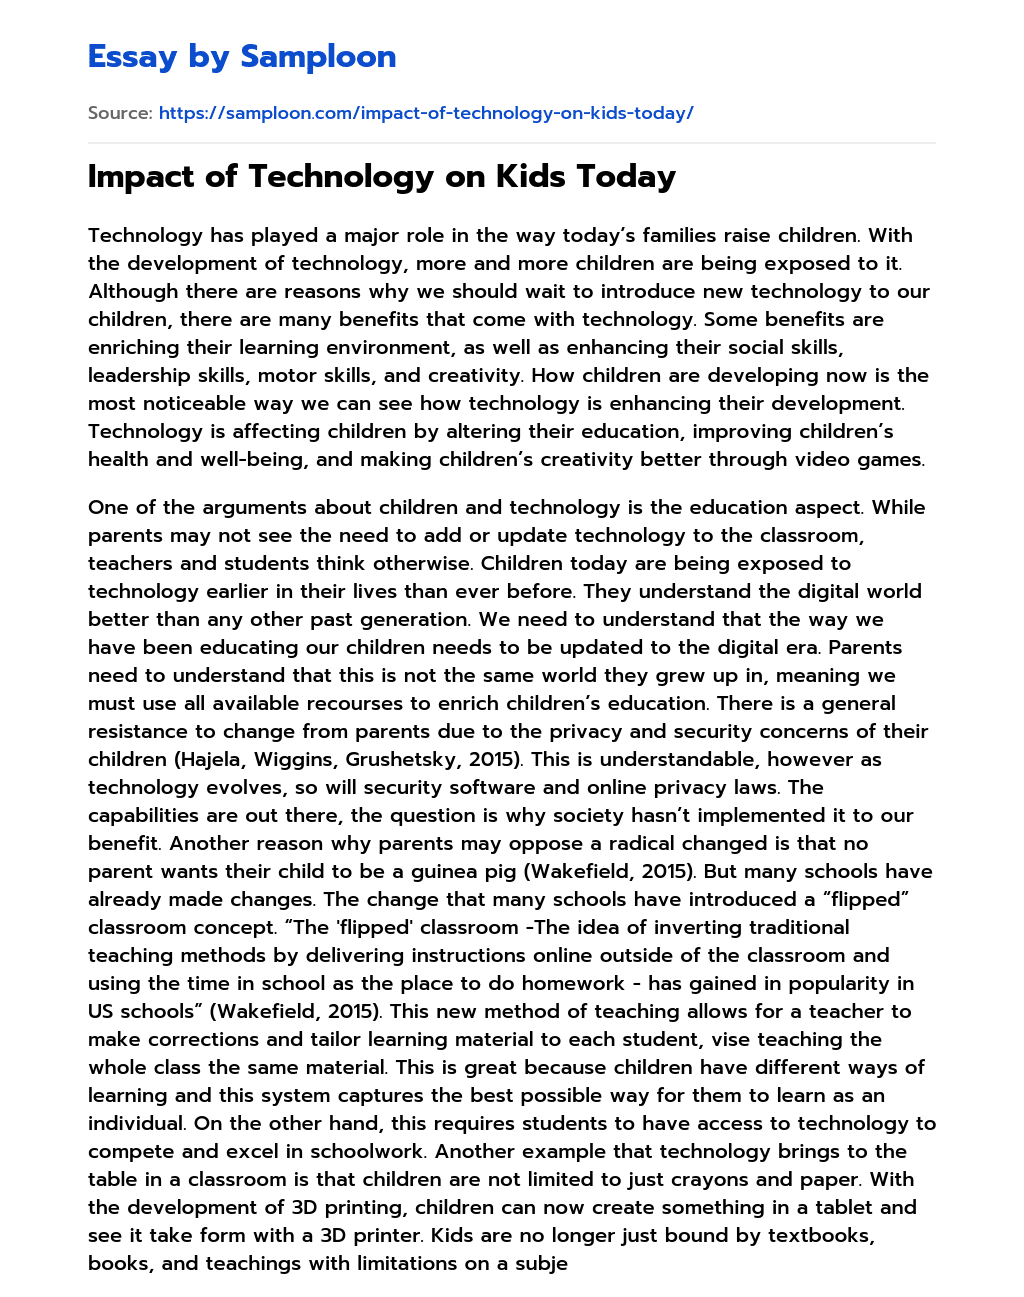 Impact of Technology on Kids Today essay